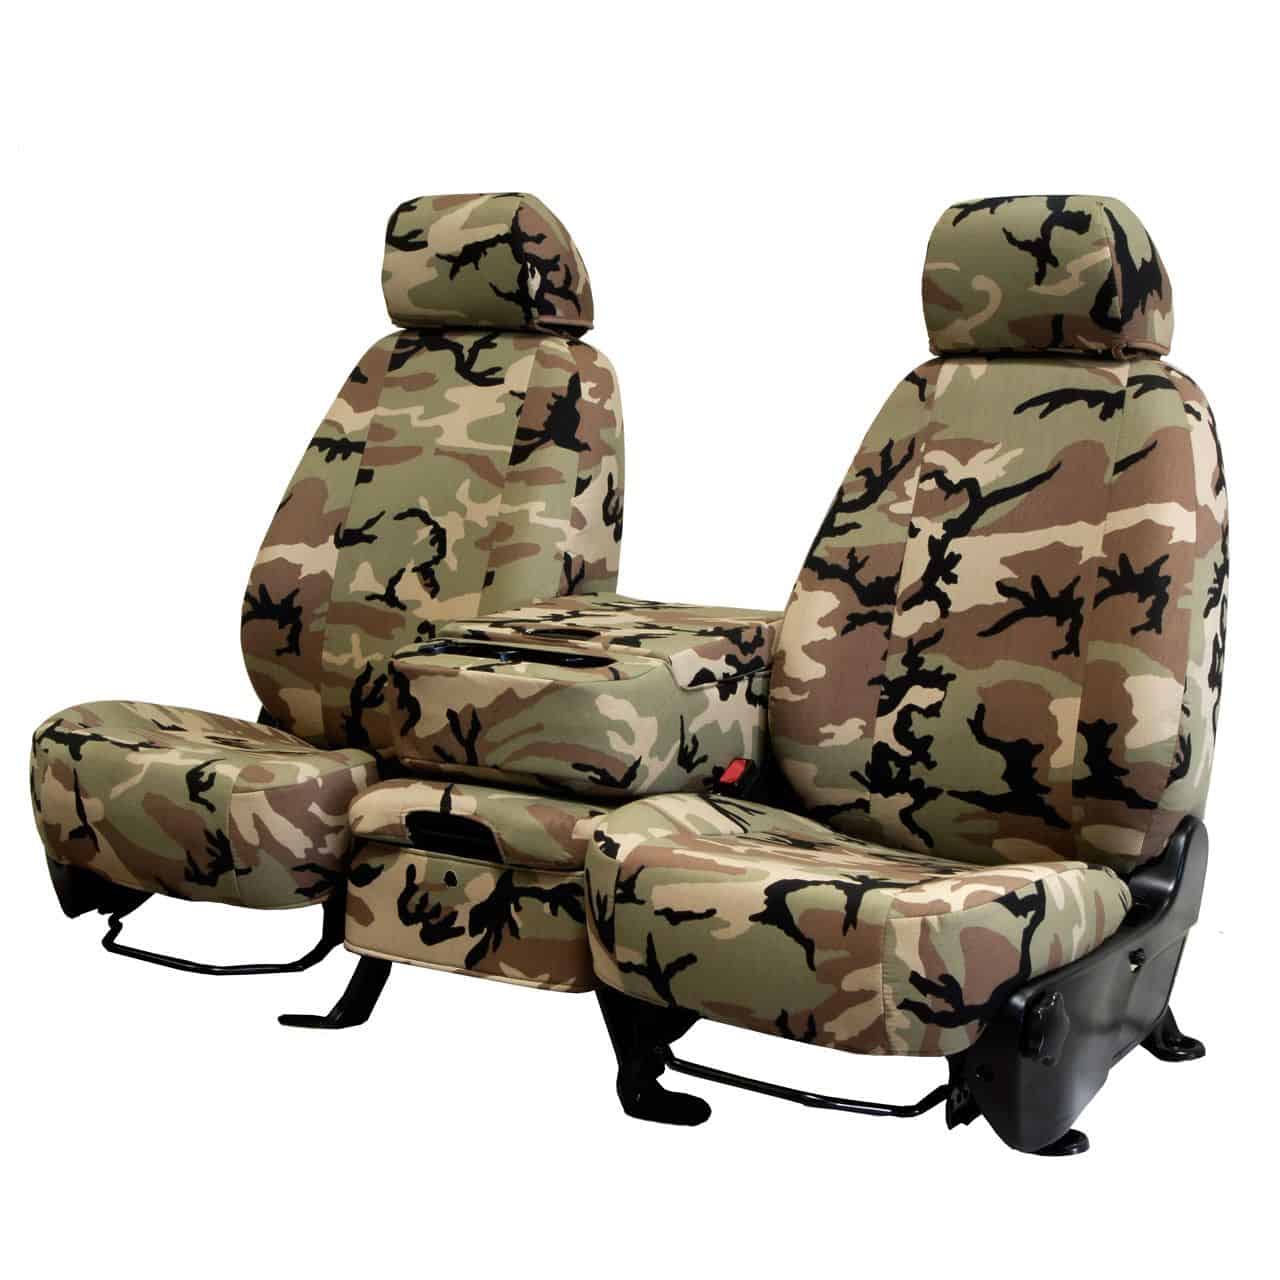 Retro Camo Seat Covers Great Accessory For Cars Trucks And Suv S - 2021 Chevy 1500 Camo Seat Covers